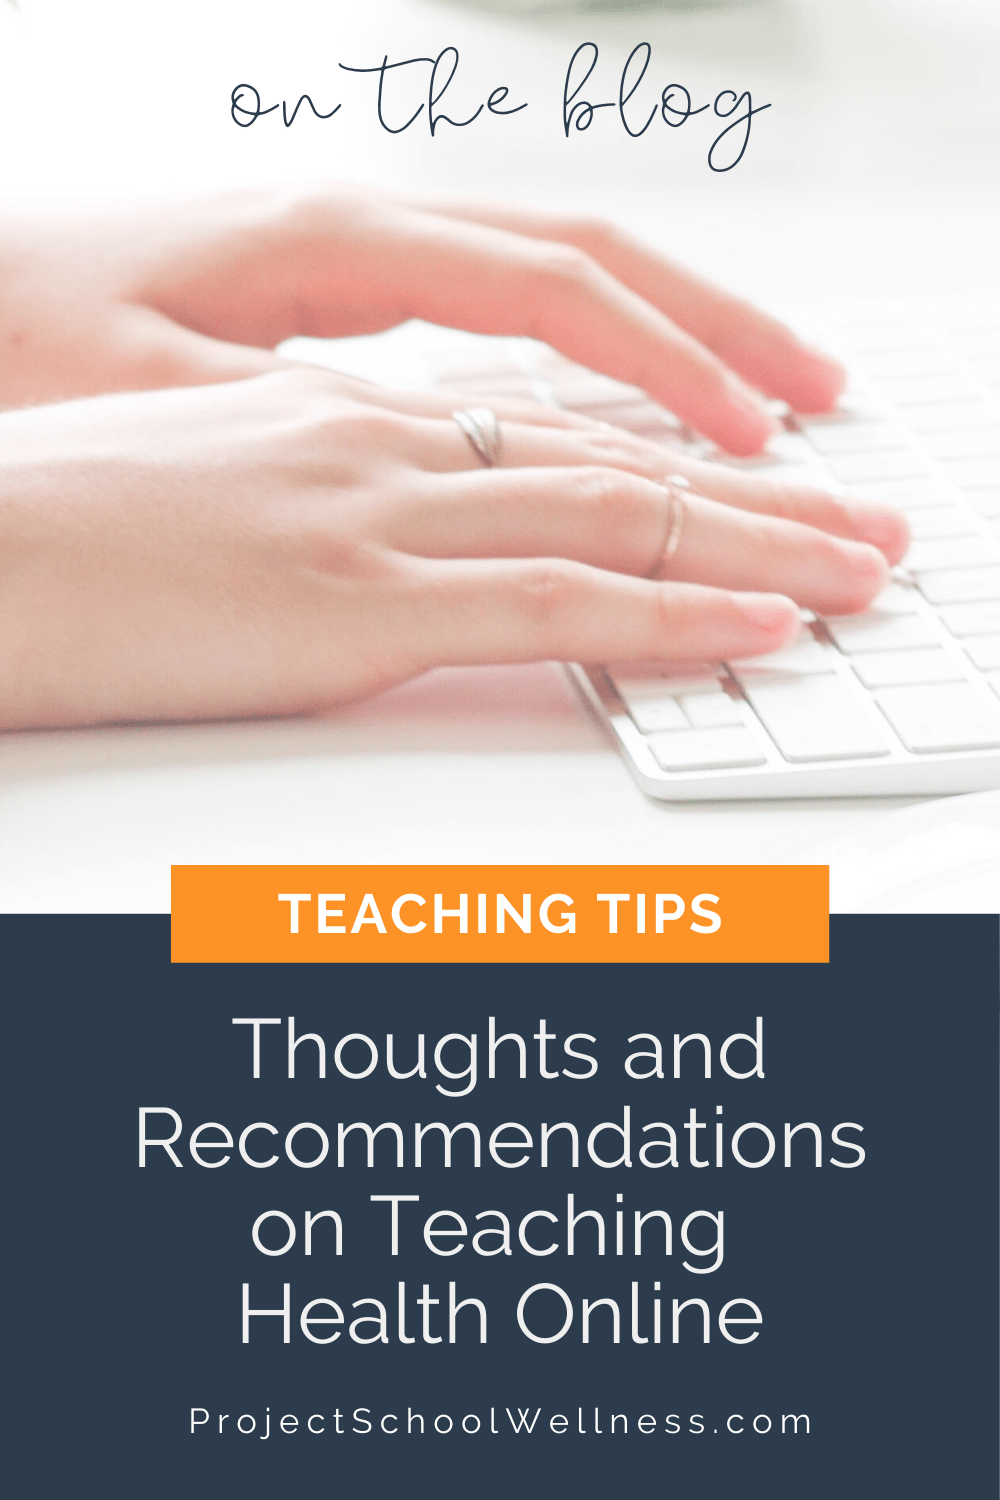 Health Teaching Tips - Thoughts and Recommendations for Teaching Health Online - Digital Learning Tips and Tricks